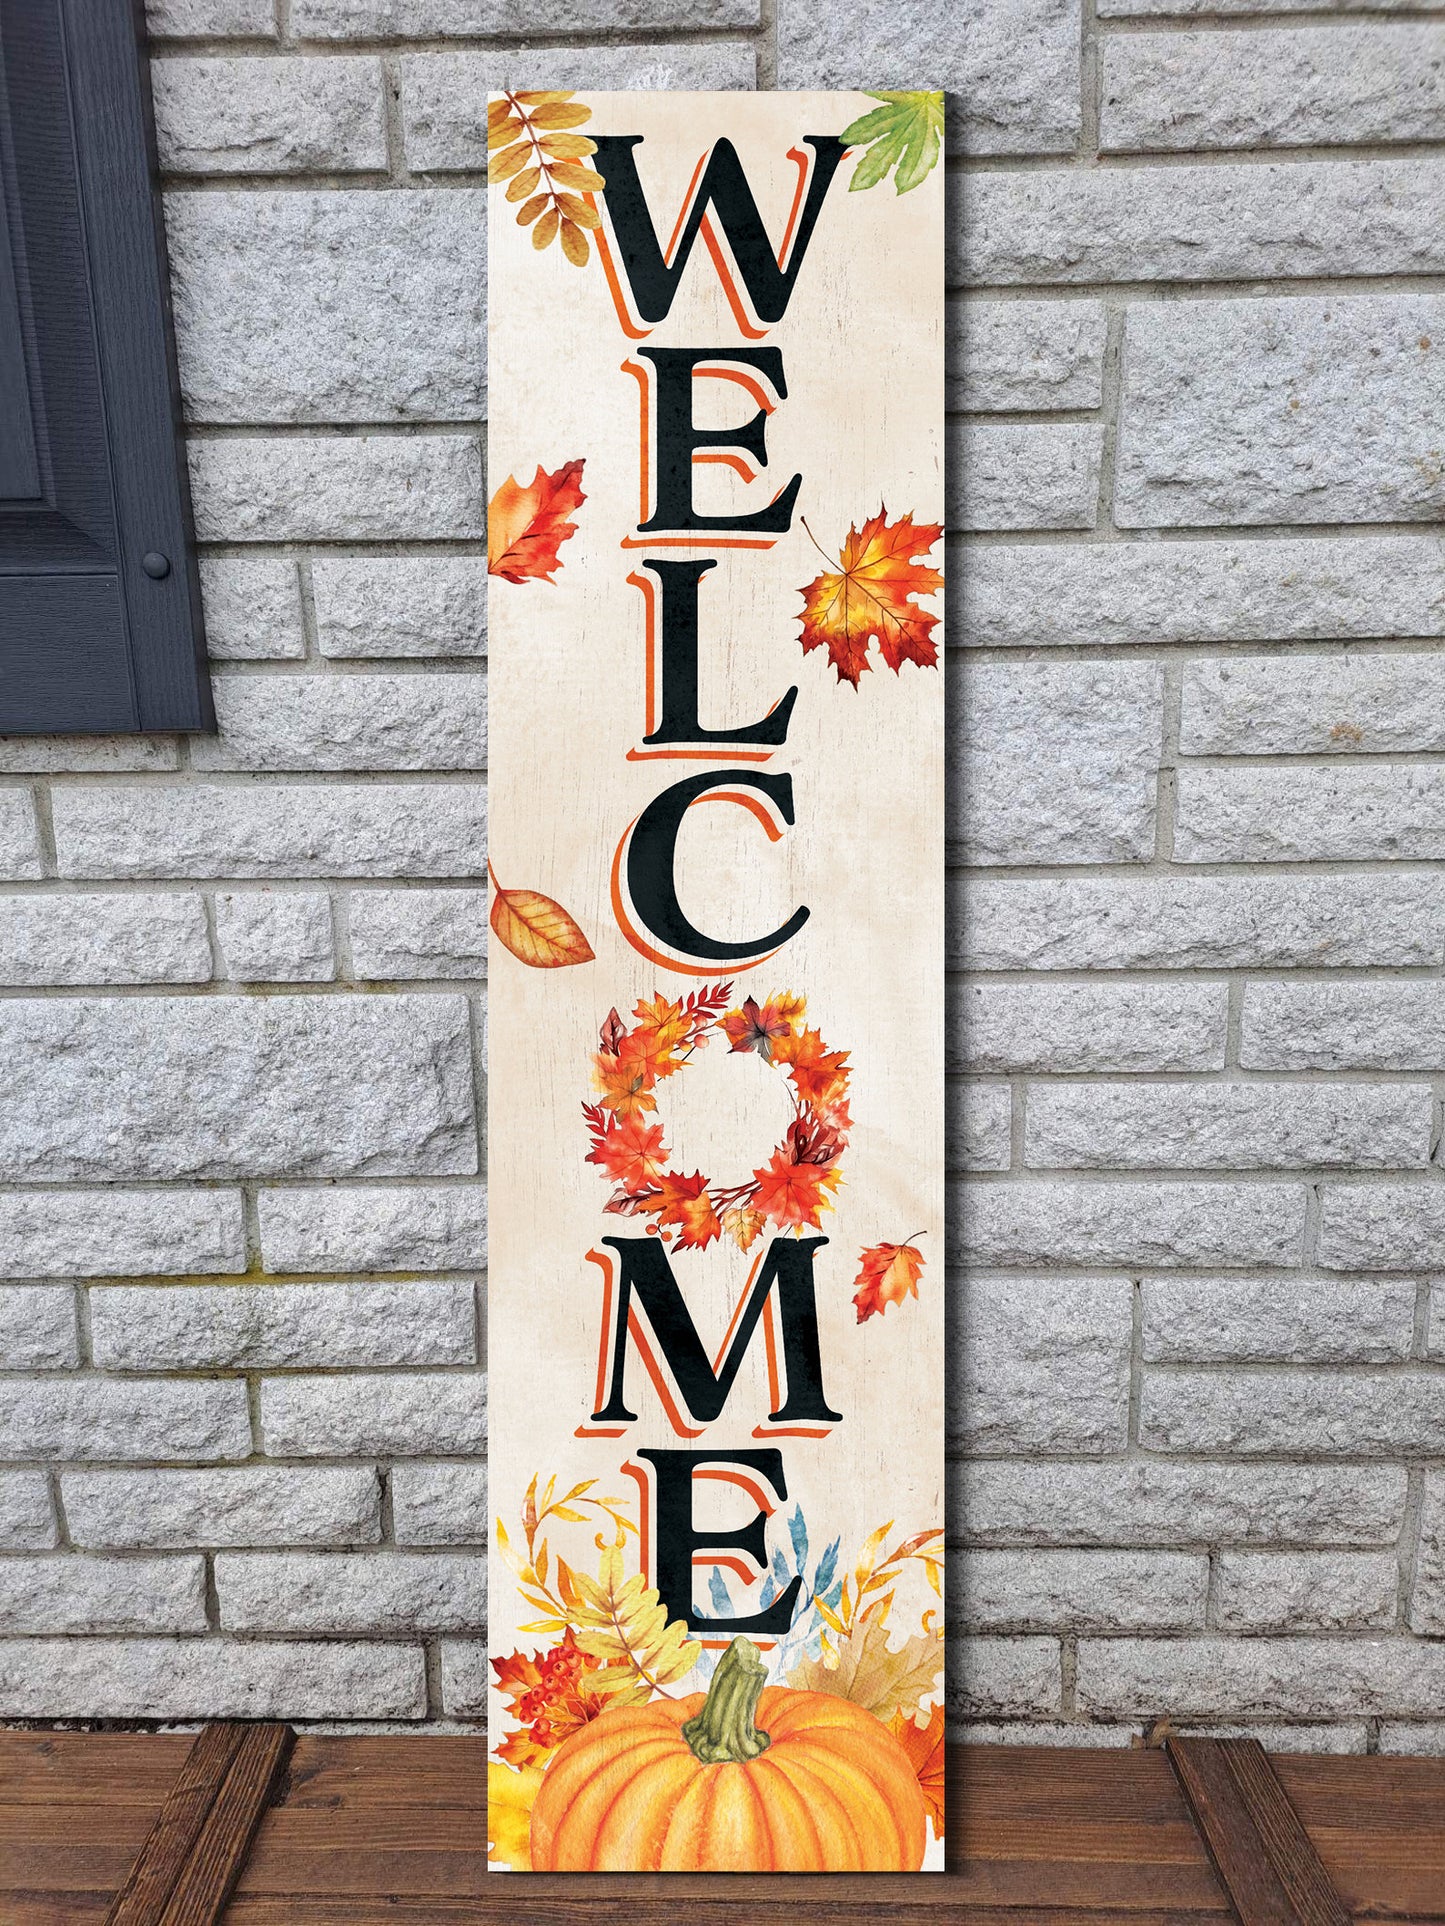 36-Inch "Welcome" Fall Porch Sign - Wooden Decor - Front Door Display for Autumn Celebrations - Rustic Entryway Accessory